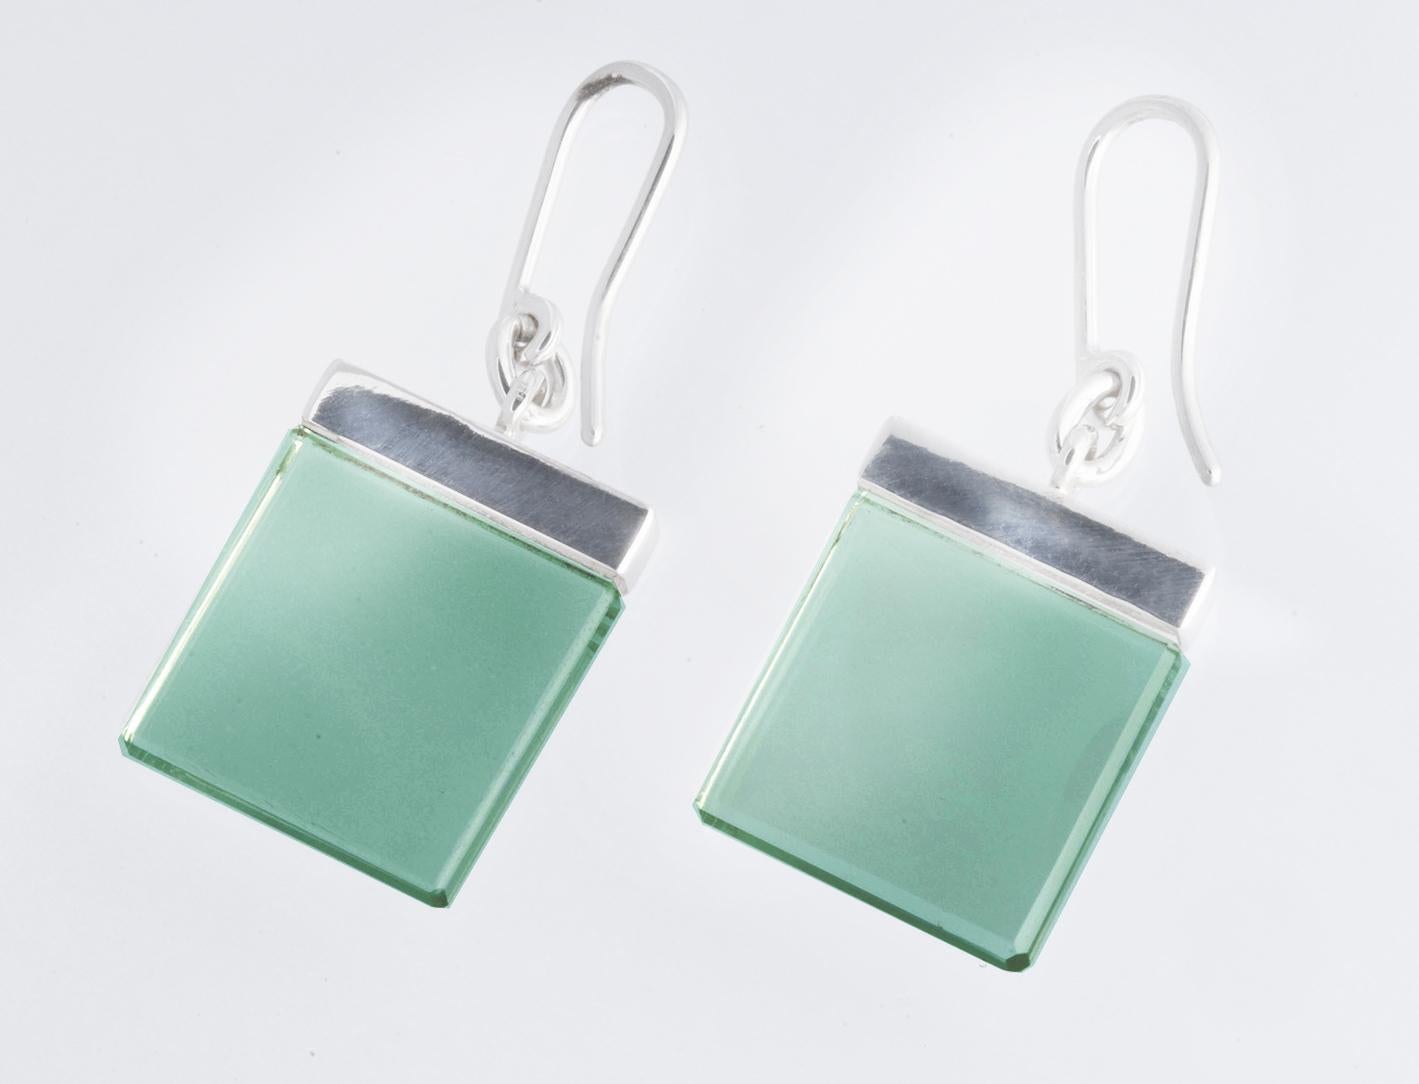 The earrings are made of 14 karat white gold and feature 15x15x3 mm natural green quartzes that are both attractive and elegant.

This contemporary jewellery collection was originally designed by artist Polya Medvedeva as sculptures made of cubes of